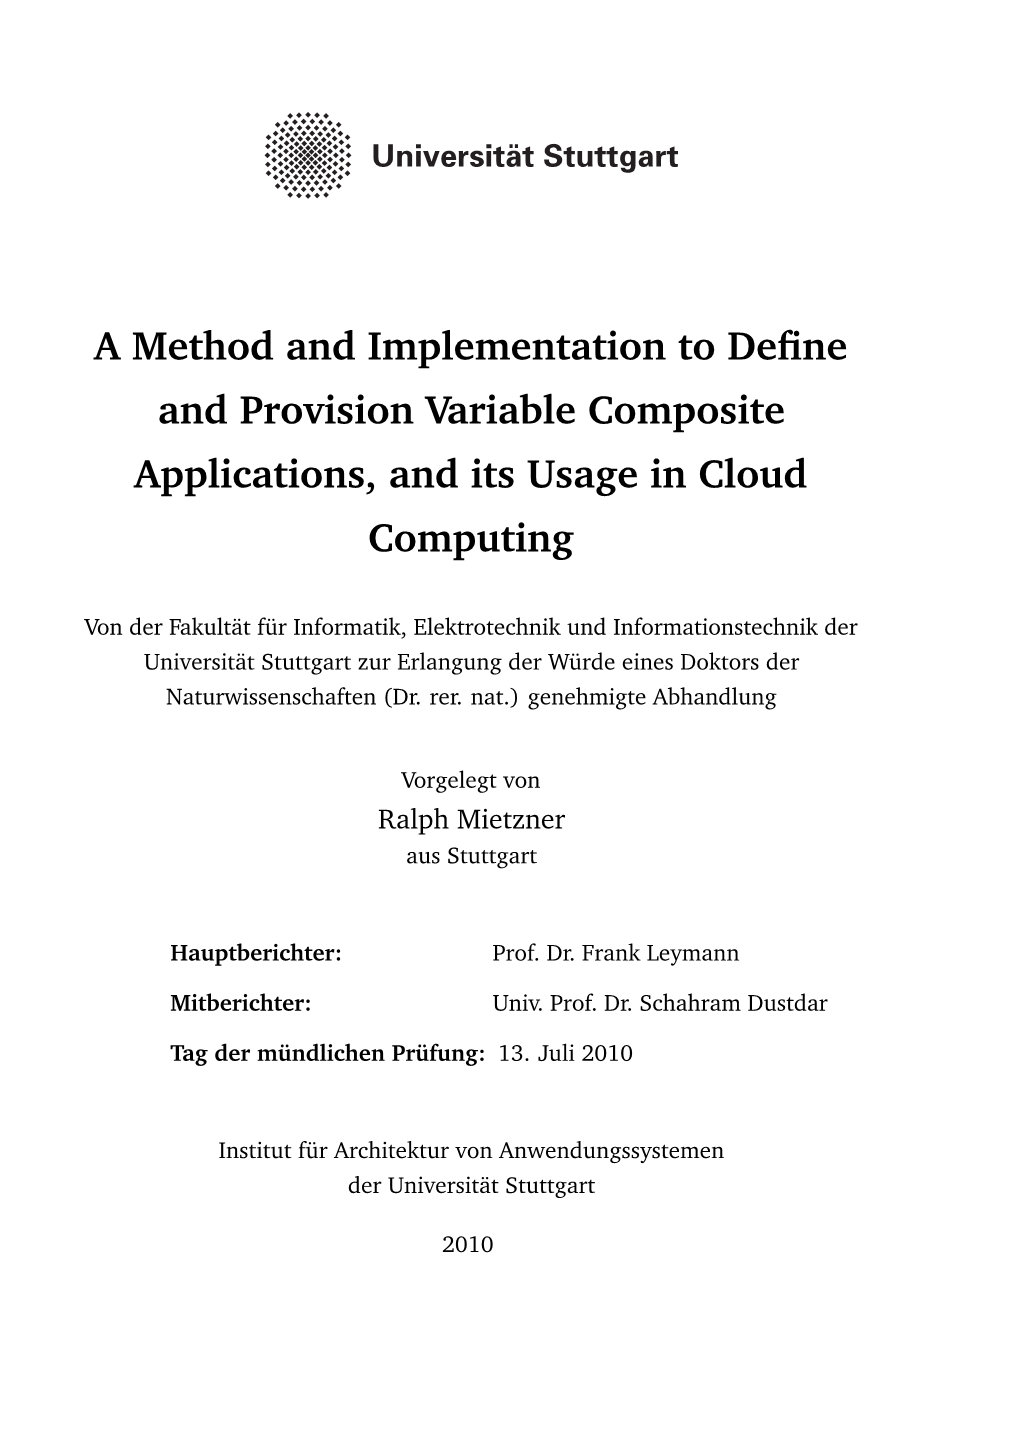 A Method and Implementation to Define and Provision Variable